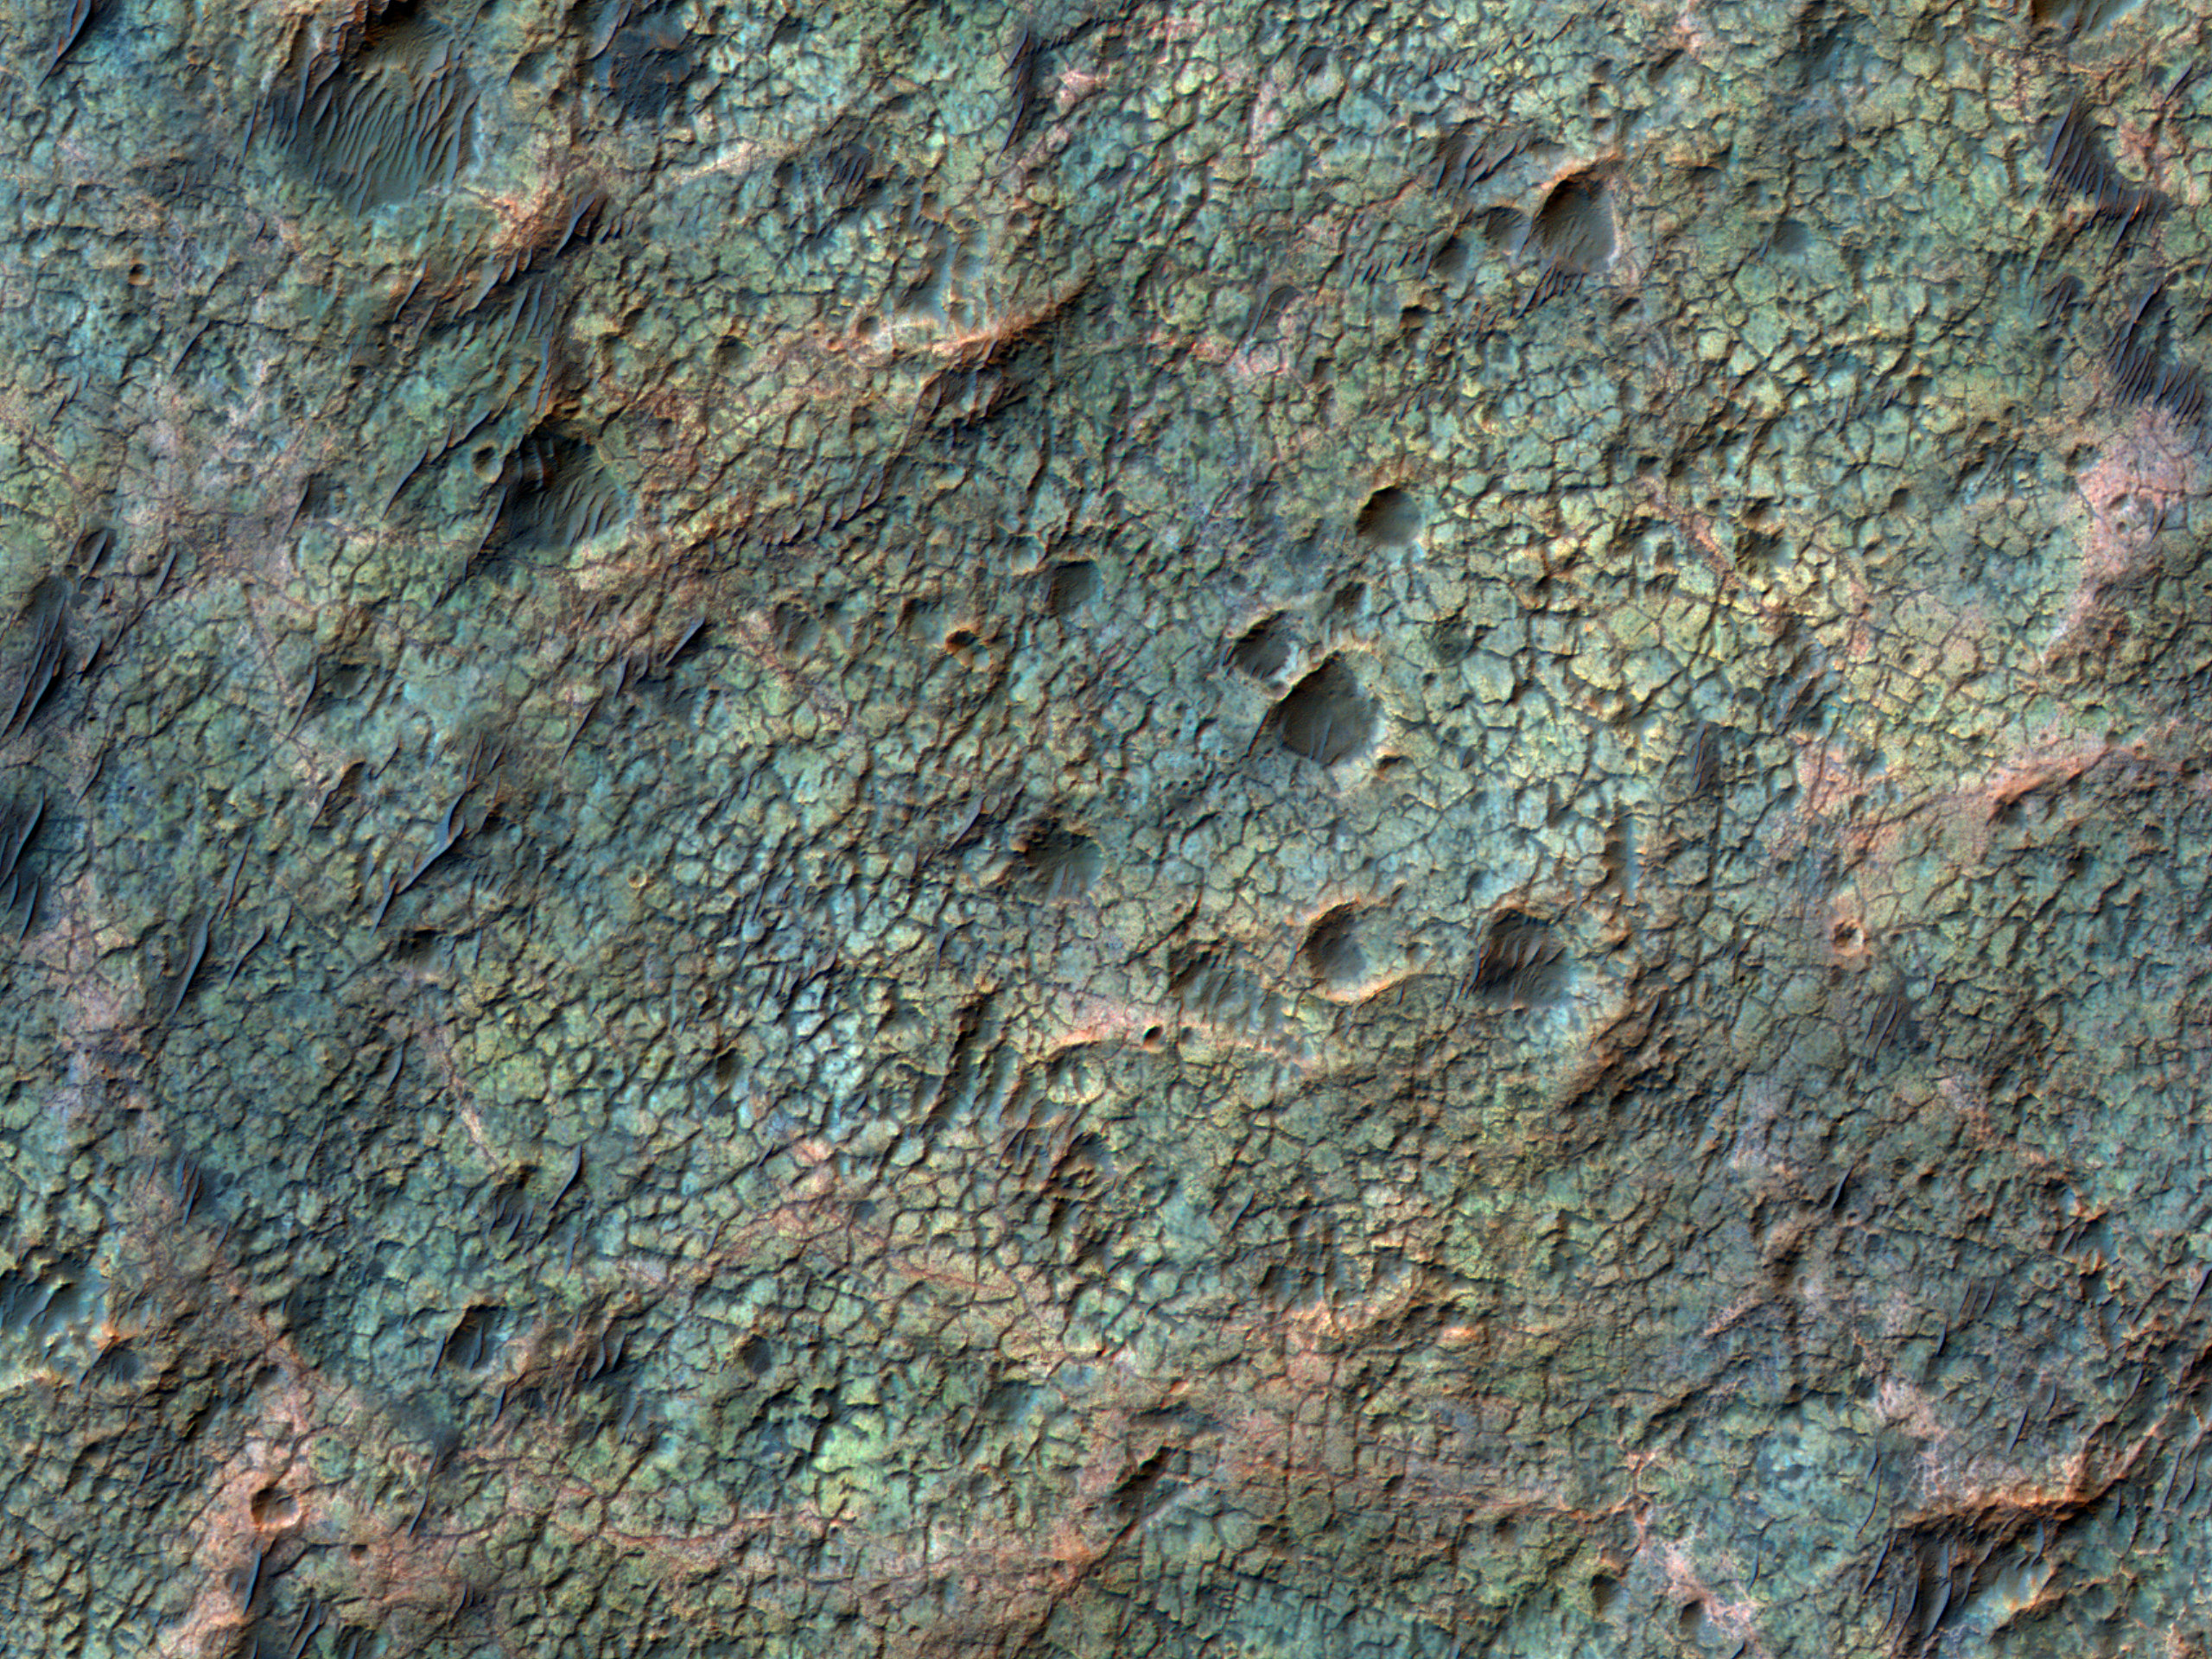 Valley Networks in the Ancient Martian Highlands